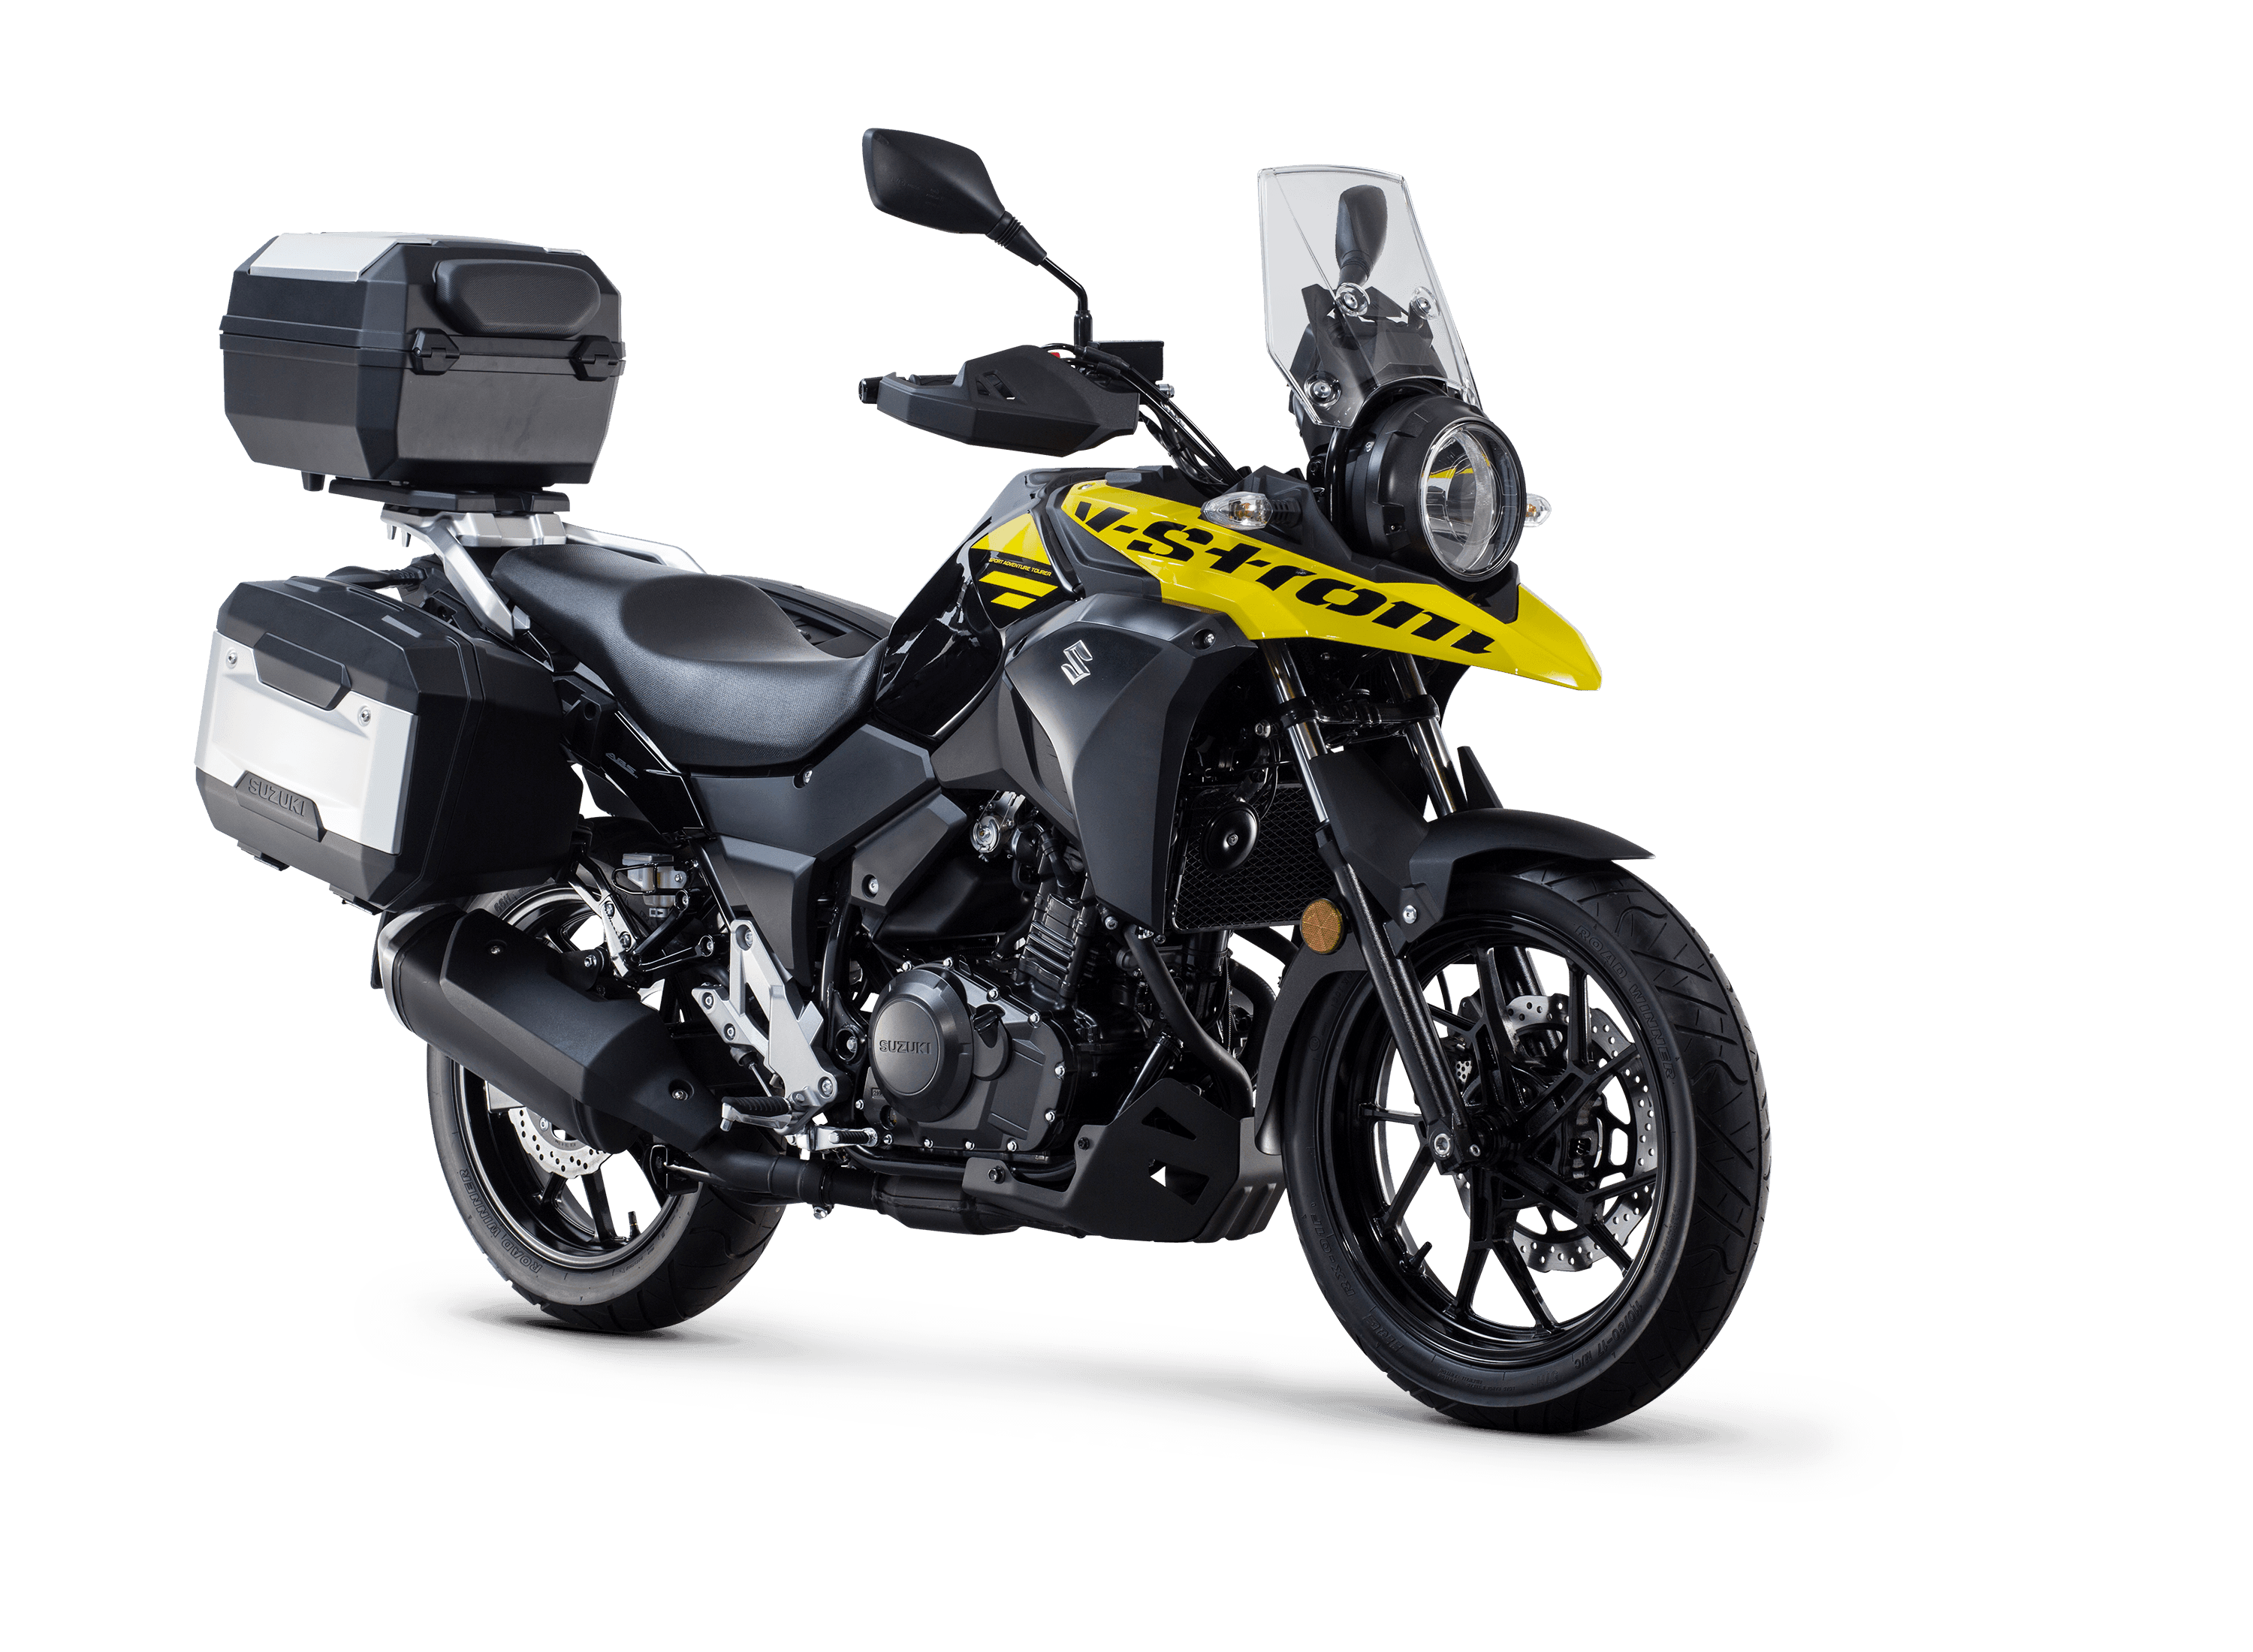 Suzuki Planning A New 250cc Adventure Motorcycle For India?